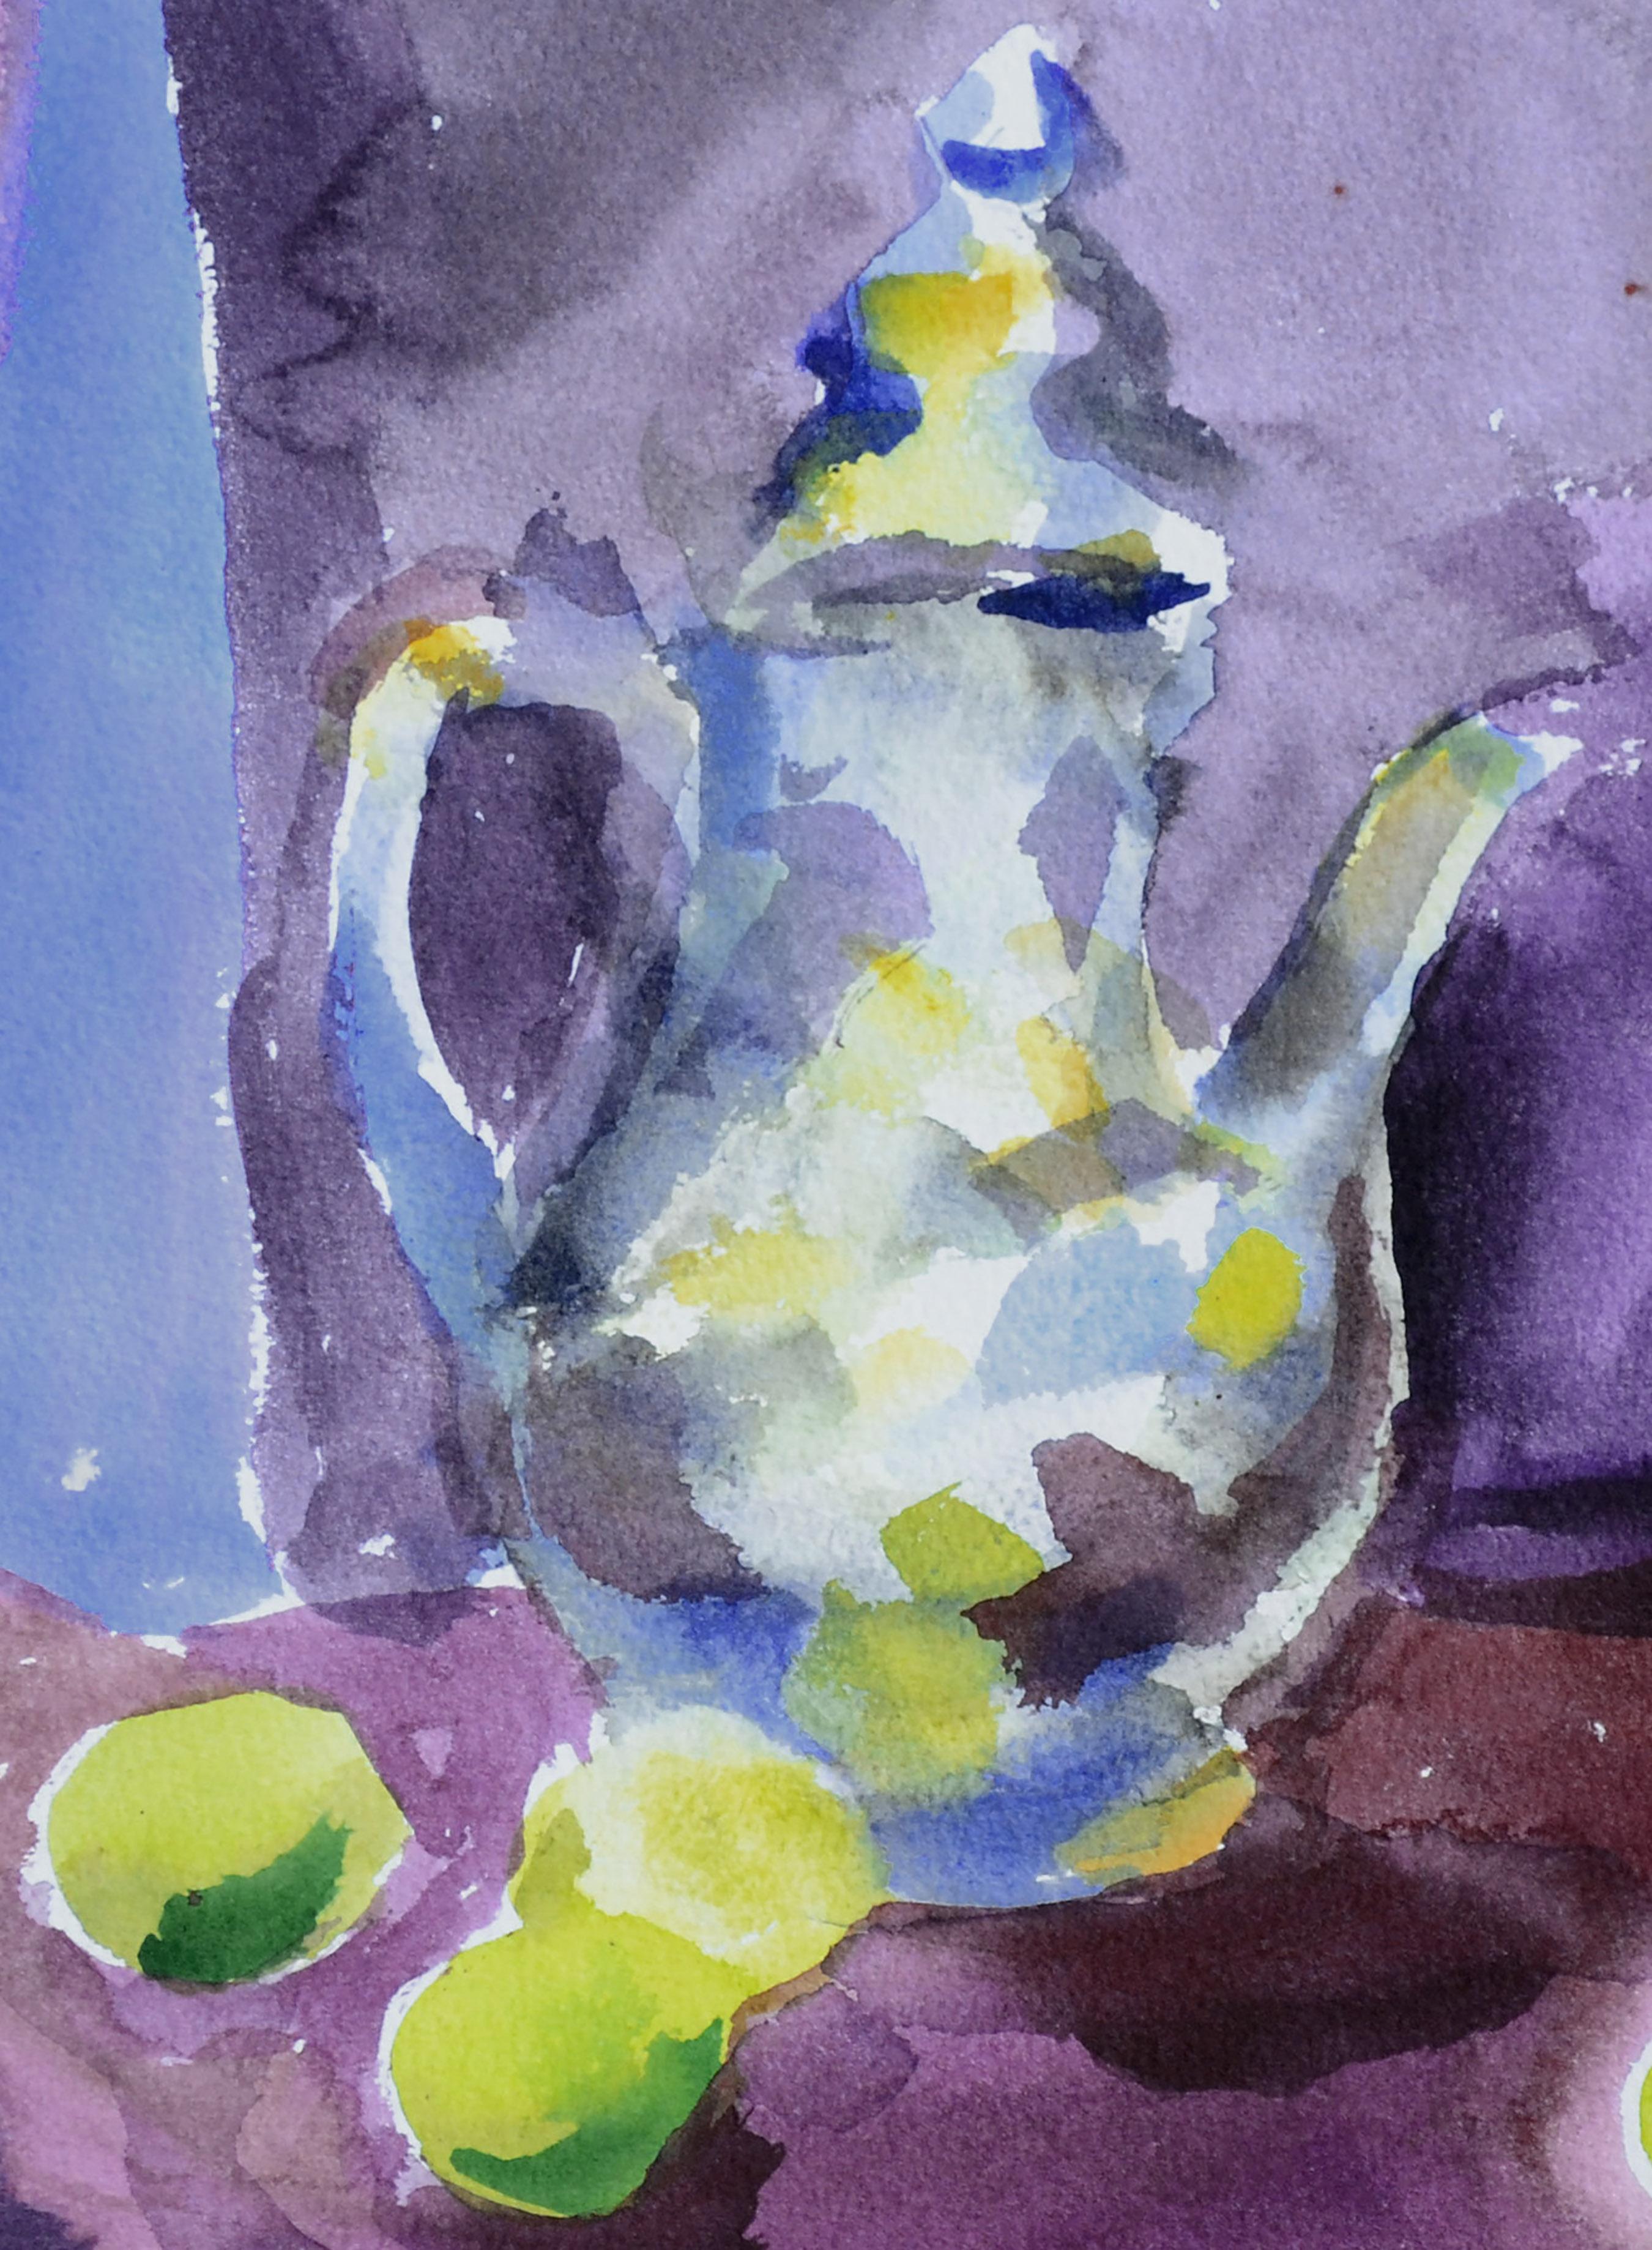 Roses & Teapot with Limes Still Life  - American Impressionist Art by Les Anderson